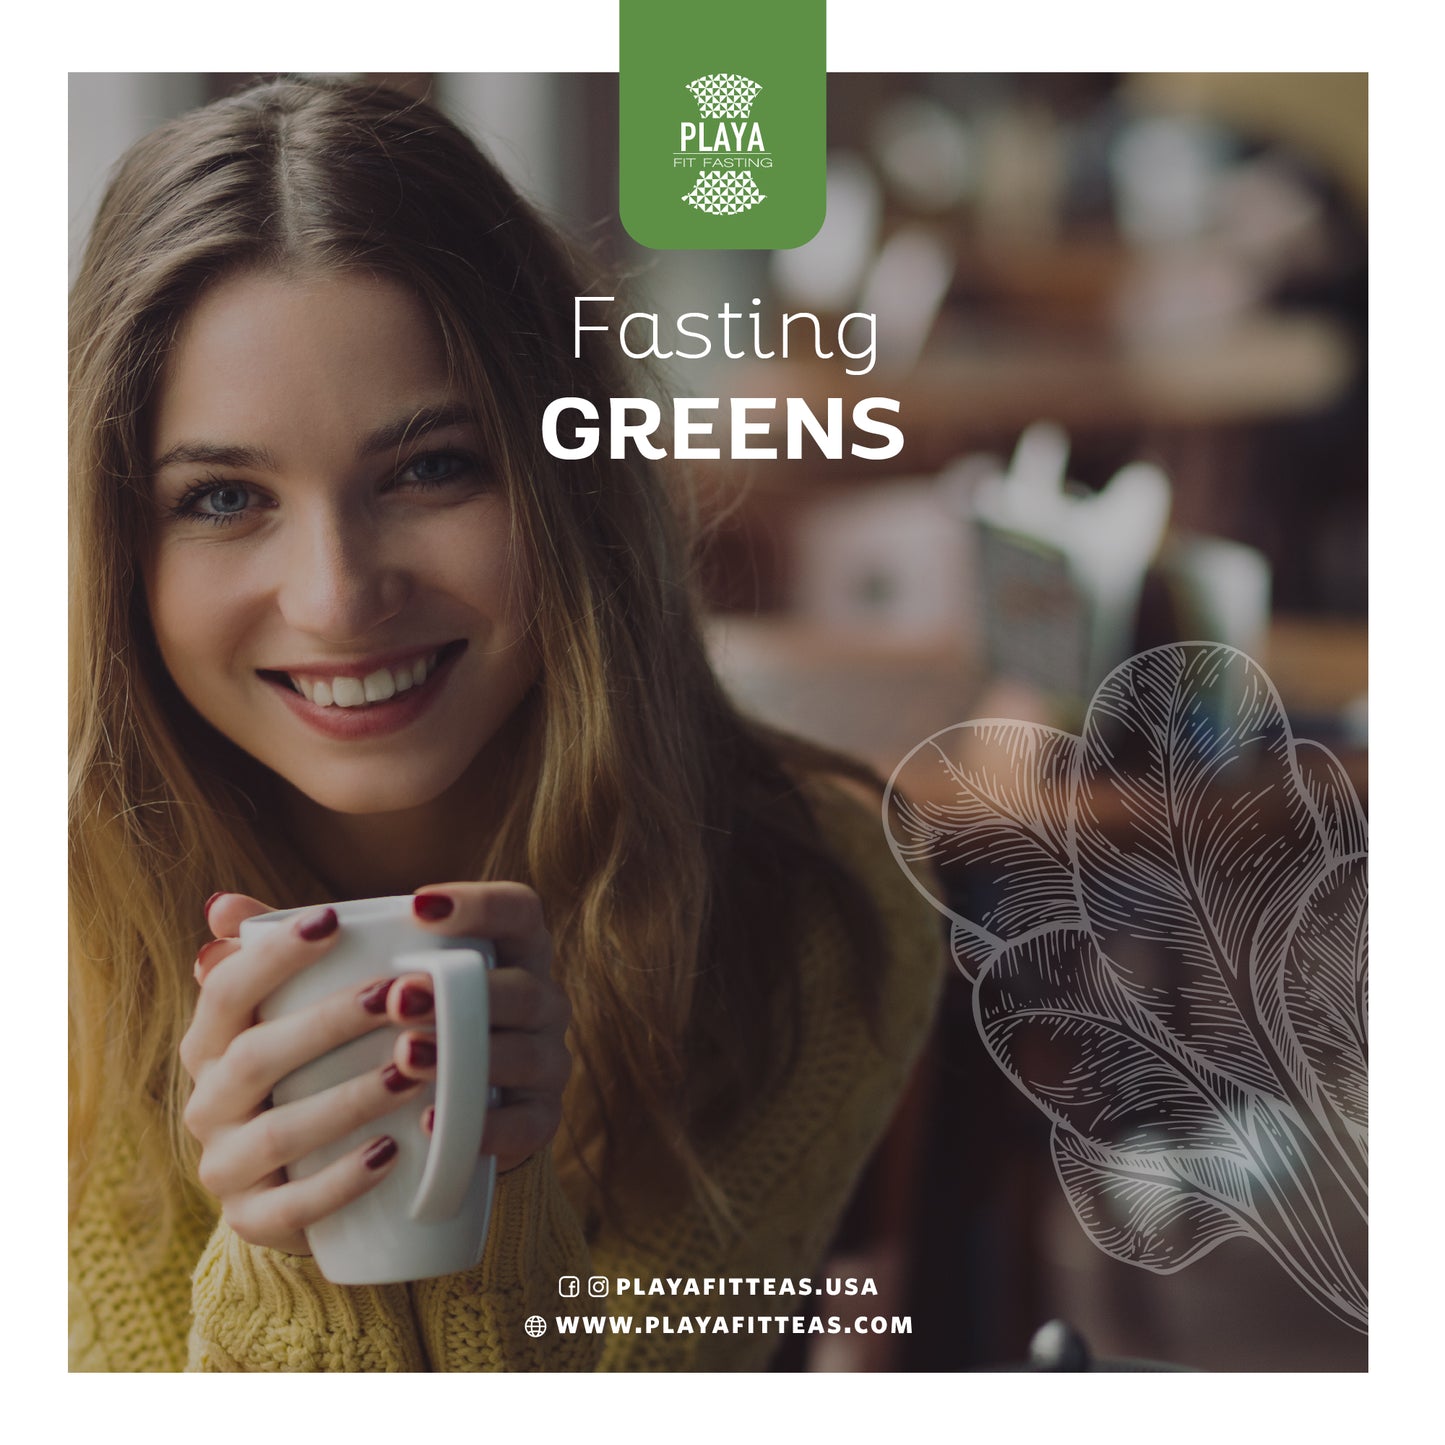 2 Meses de Fasting Greens (20% Descuento) - Playa Fit Teas Chile